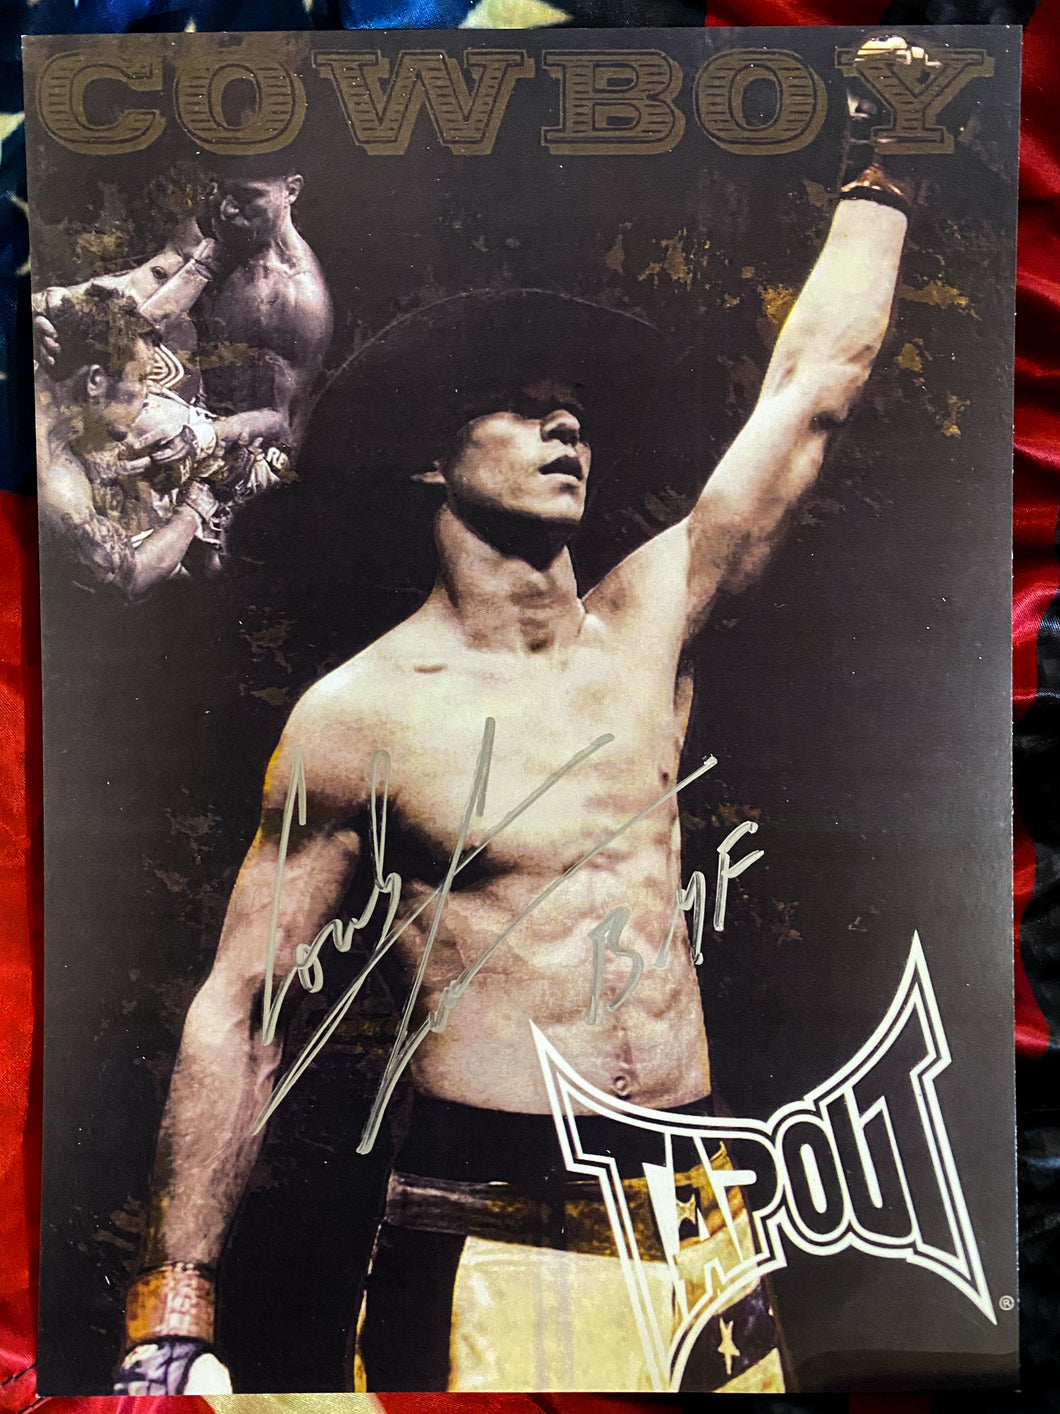 The Original First Ever Cowboy Cerrone Tapout Poster